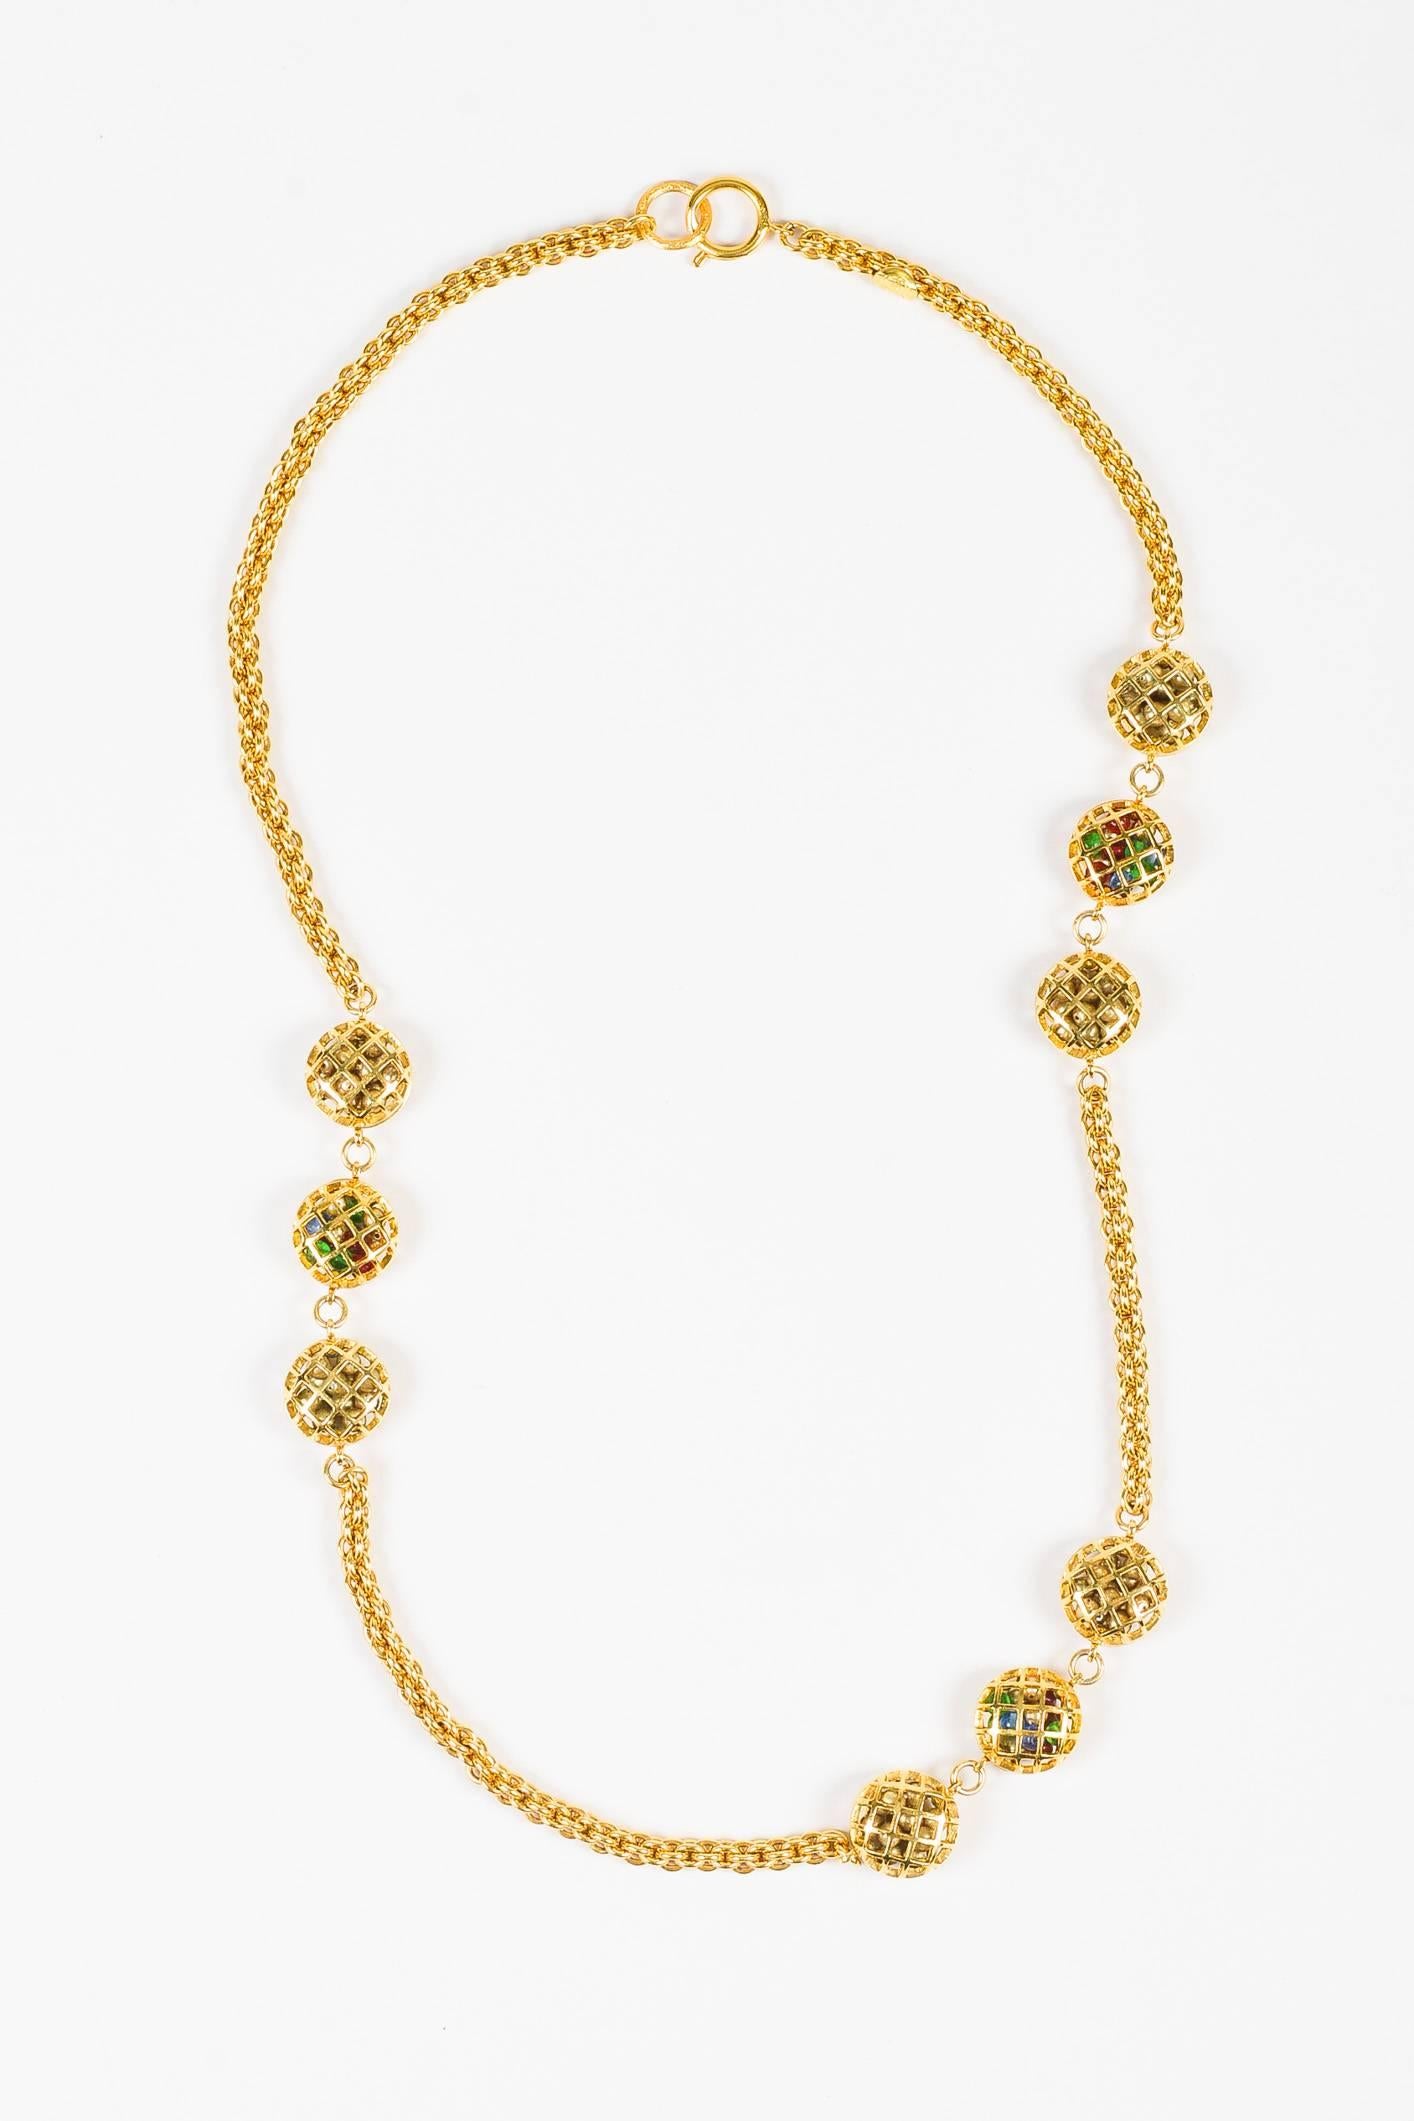 Released circa 1971-1980. Gold-tone chain-link necklace featuring cage stations filled with signature Gripoix stones. Spring ring clasp.

Additional measurements: Chain Width 8mm, Pendant Height: Approx. 1 in, Pendant Length Approx. 1 in, Necklace